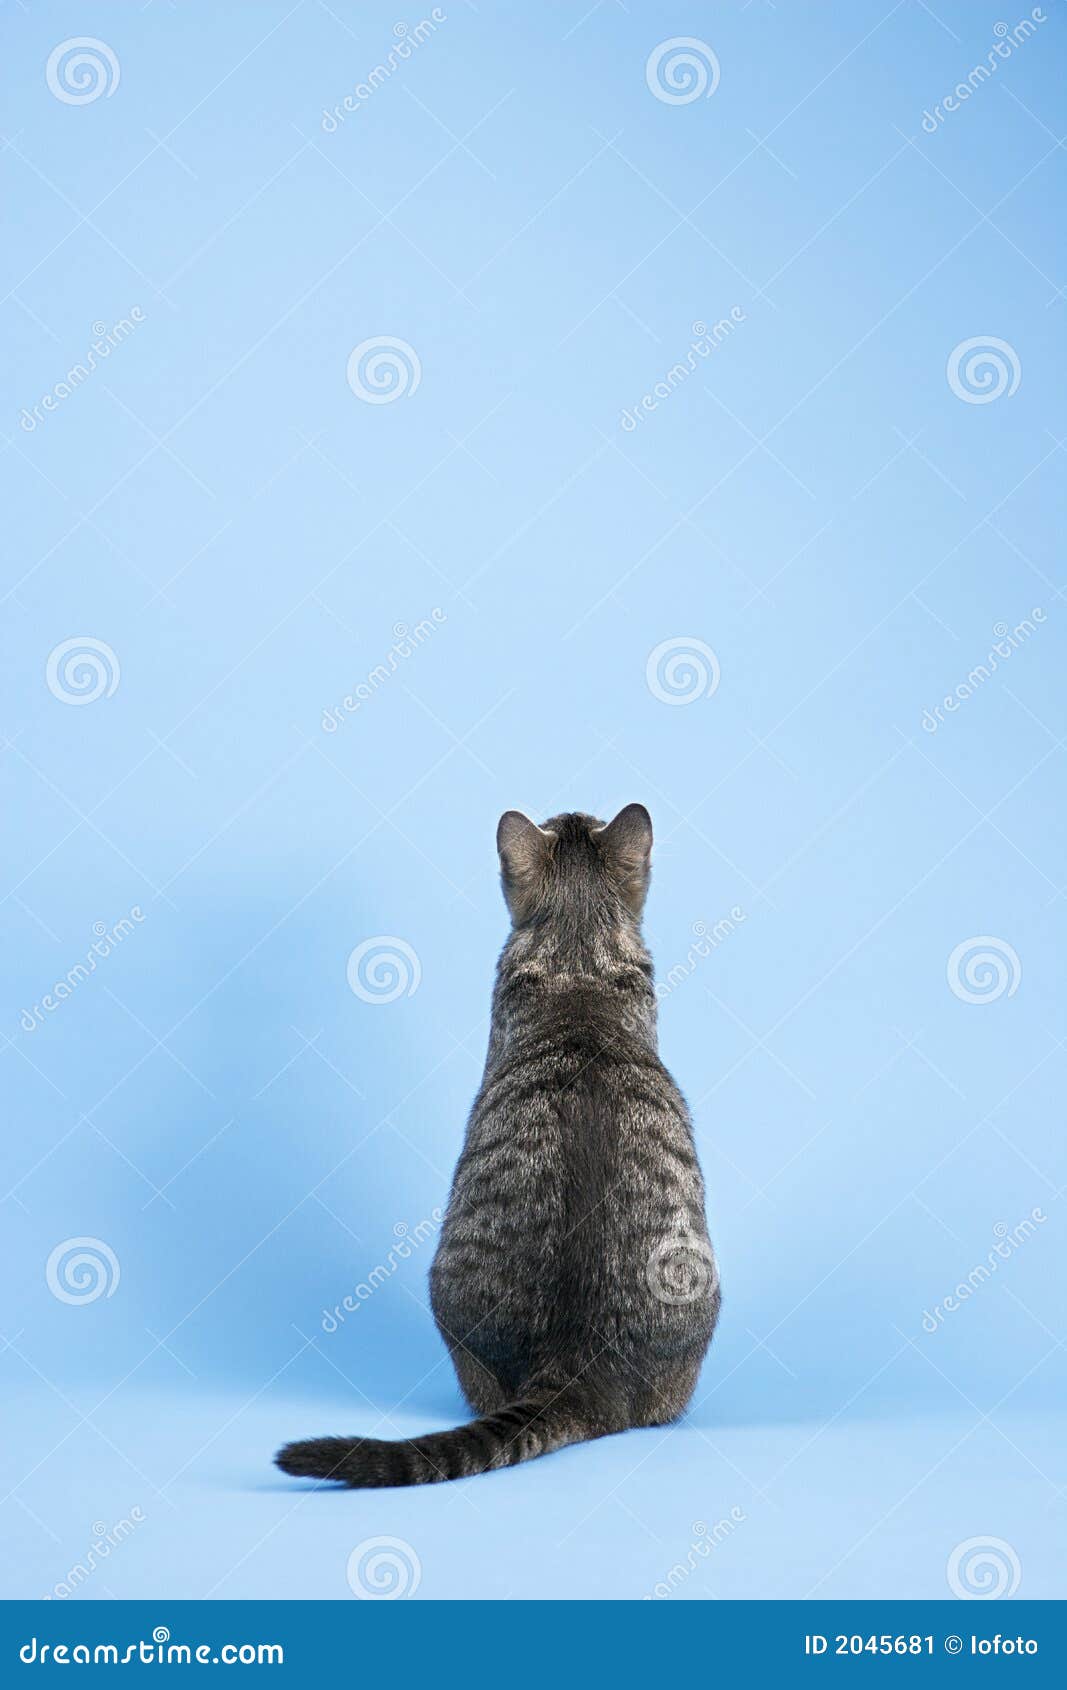 Back View Of Cat. Stock Image - Image: 2045681